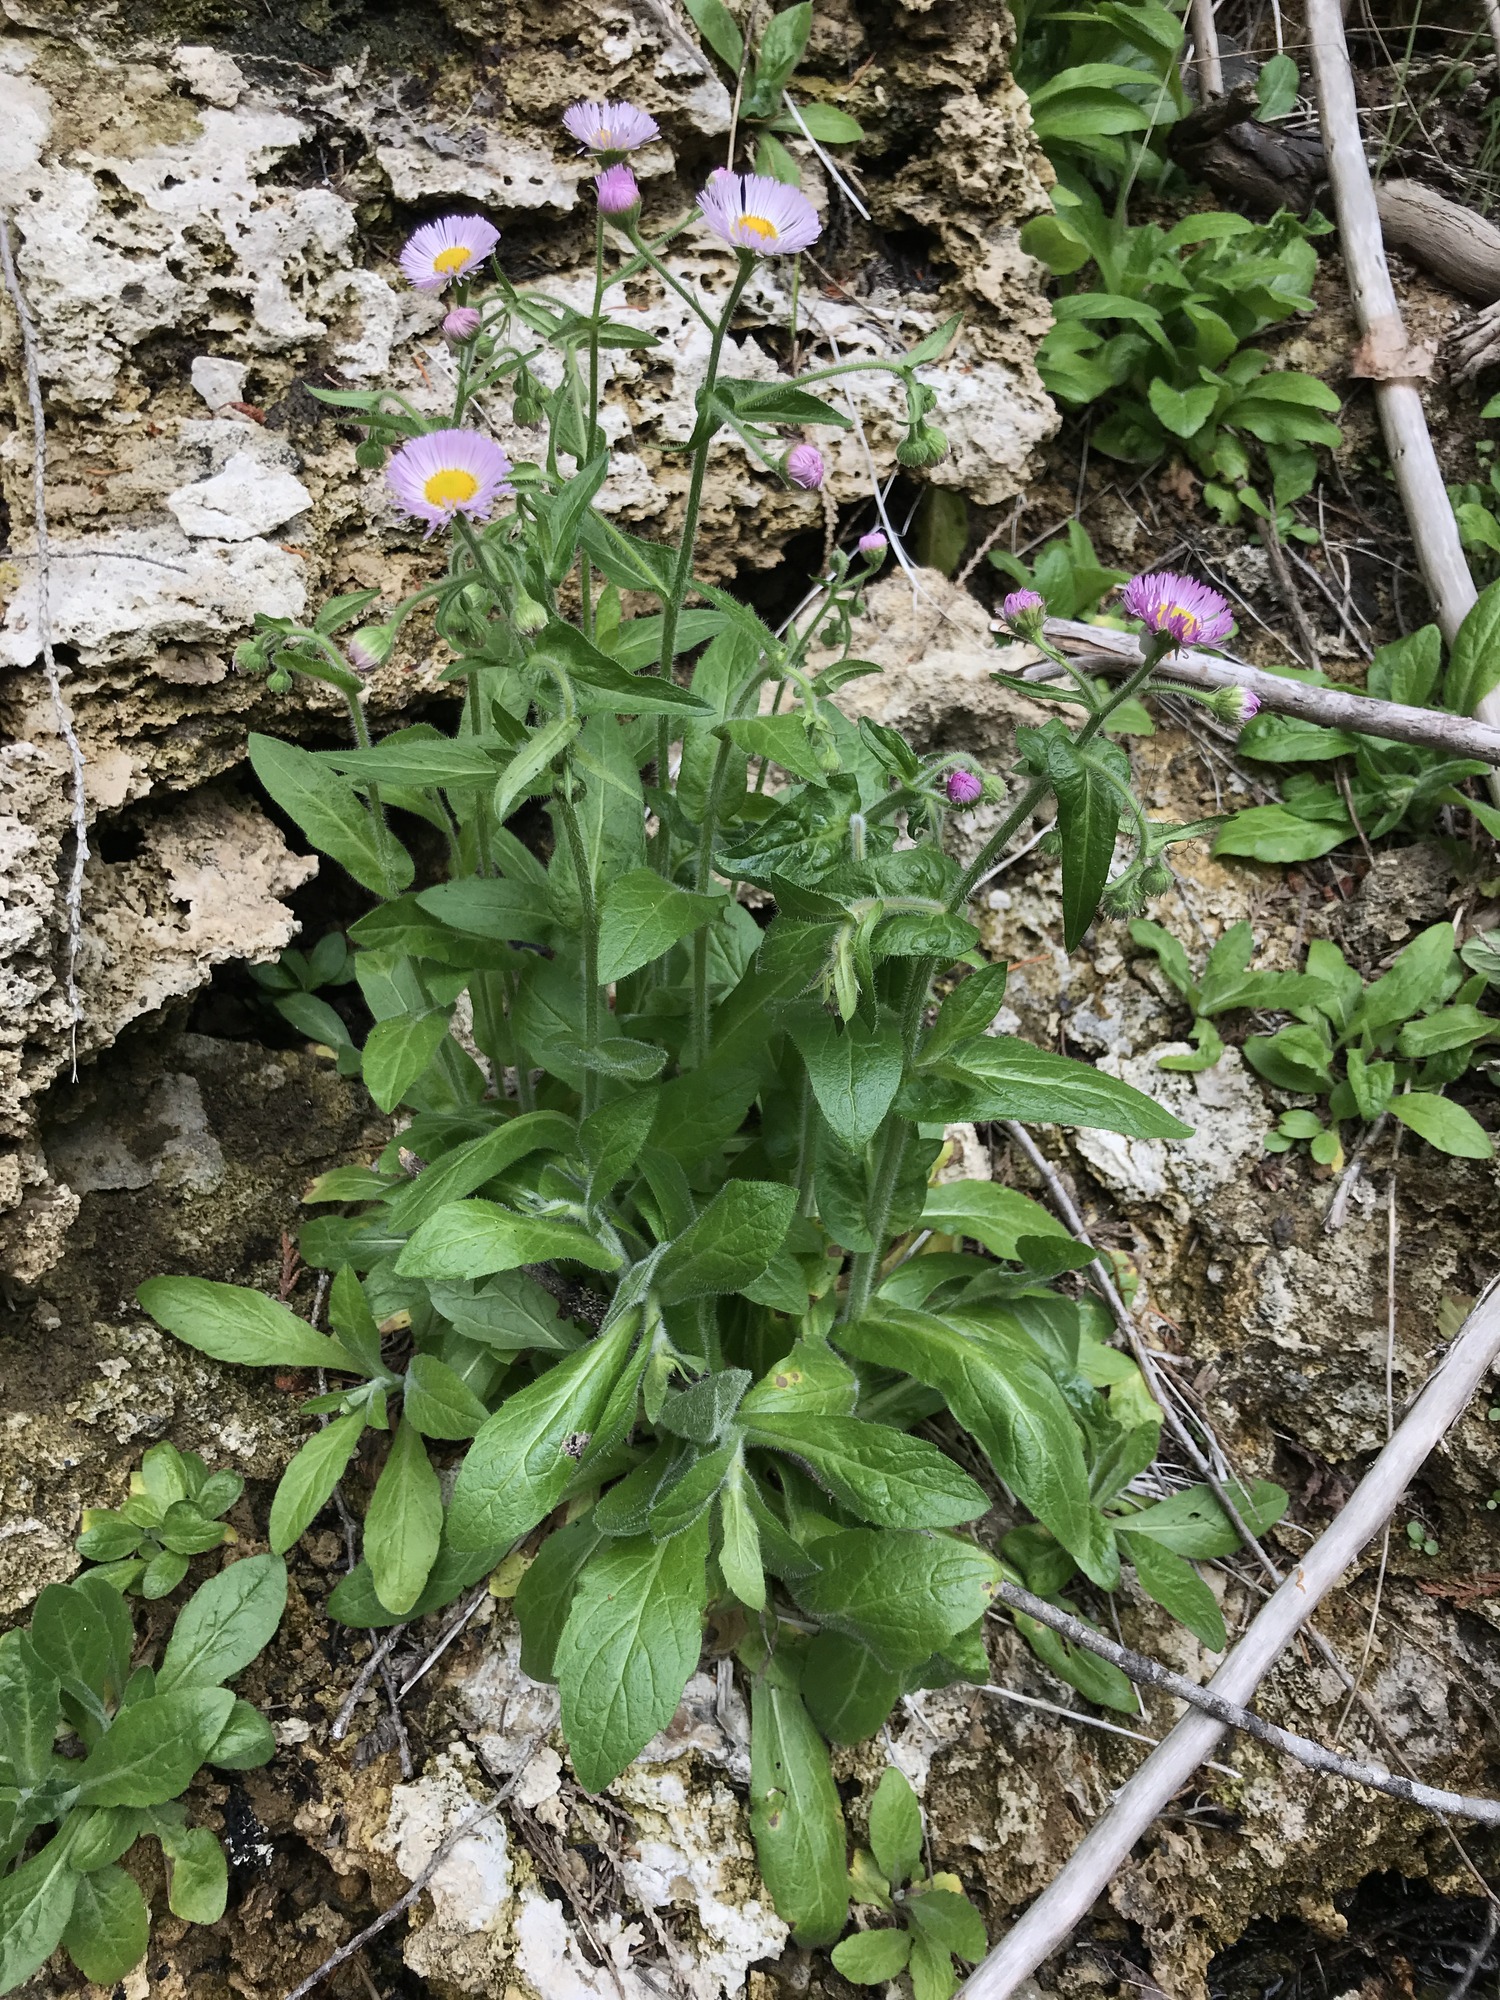 A robust plant with large green leaves and several stems topped in pale purple daisy-like blooms growing next to whiteish travertine deposits. 